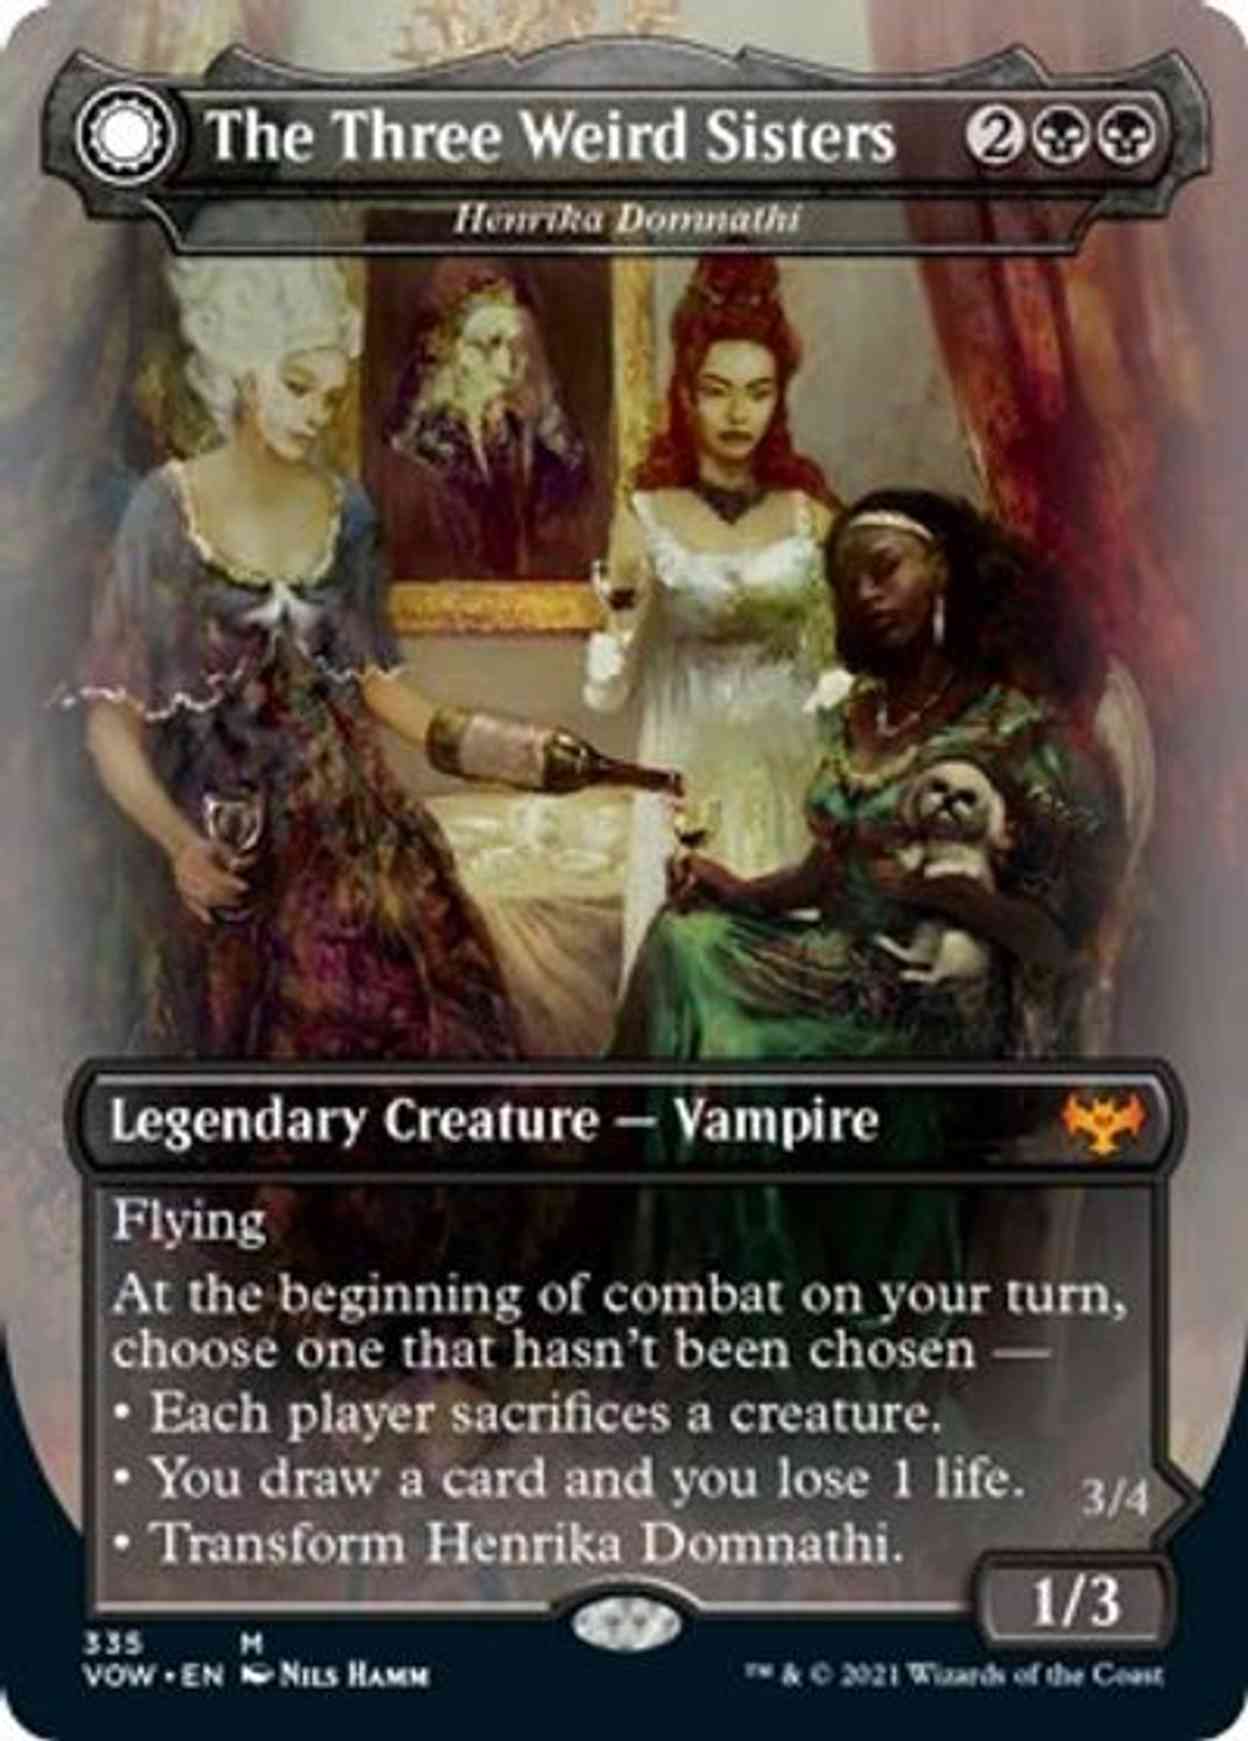 The Three Weird Sisters - Henrika Domnathi magic card front